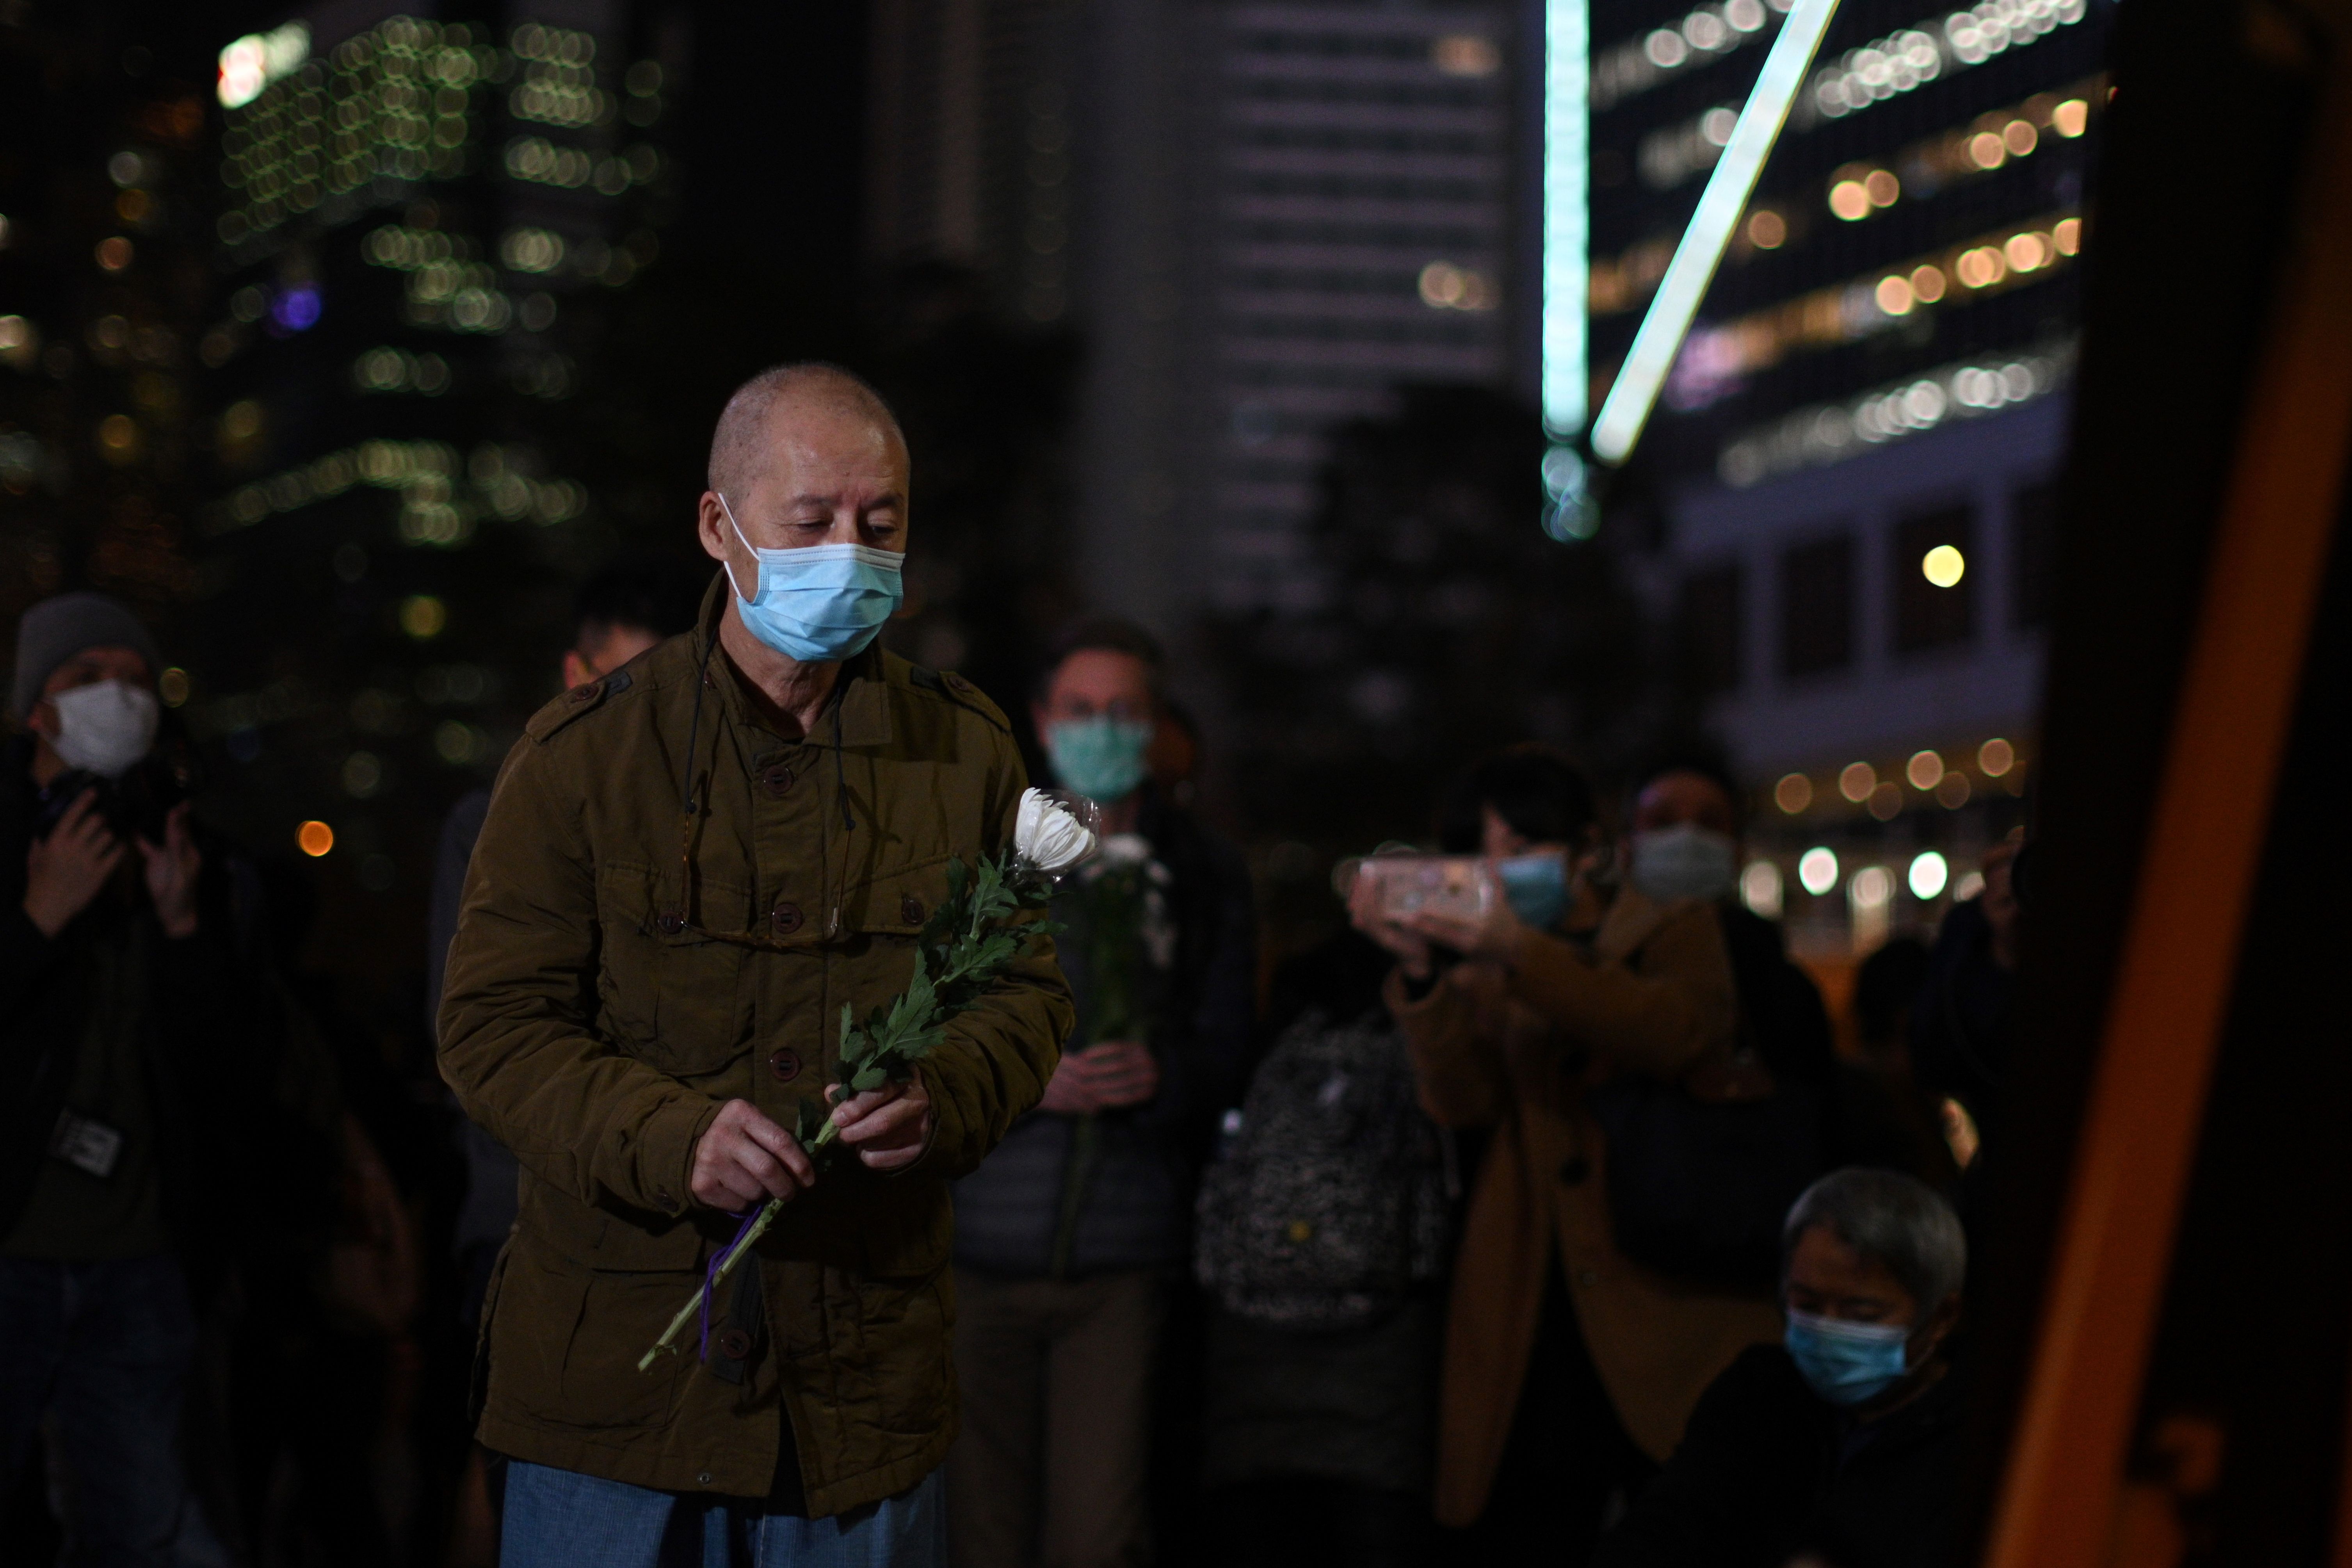 In this image, a man wearing a protective face masks carries a rose at the vigil at night